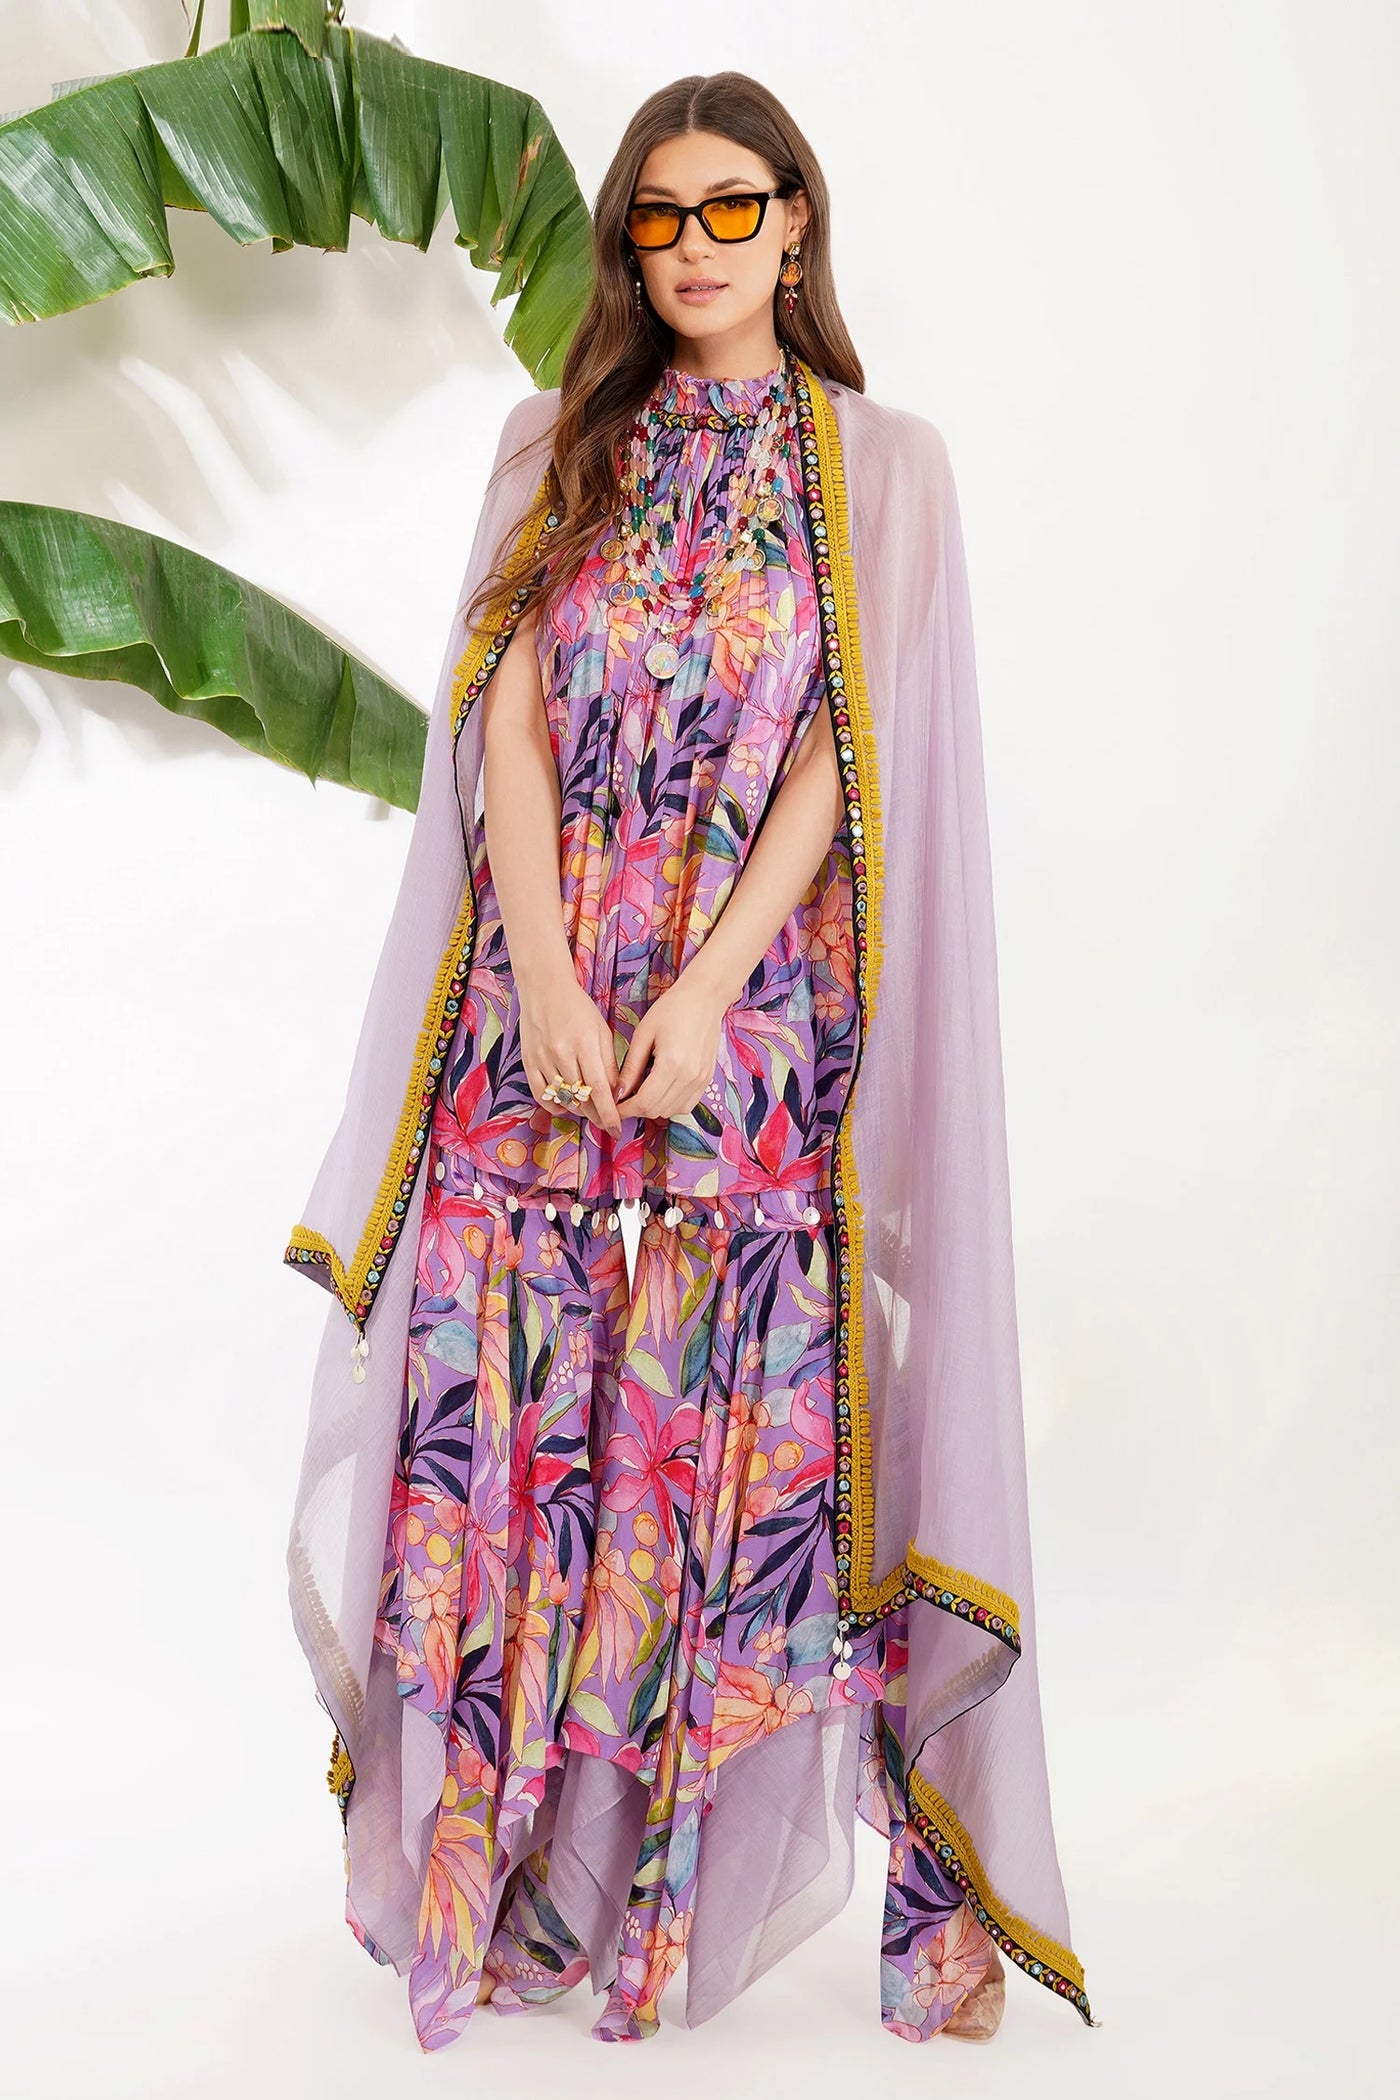 Tropical Flower Gharara Set - Indian Clothing in Denver, CO, Aurora, CO, Boulder, CO, Fort Collins, CO, Colorado Springs, CO, Parker, CO, Highlands Ranch, CO, Cherry Creek, CO, Centennial, CO, and Longmont, CO. Nationwide shipping USA - India Fashion X